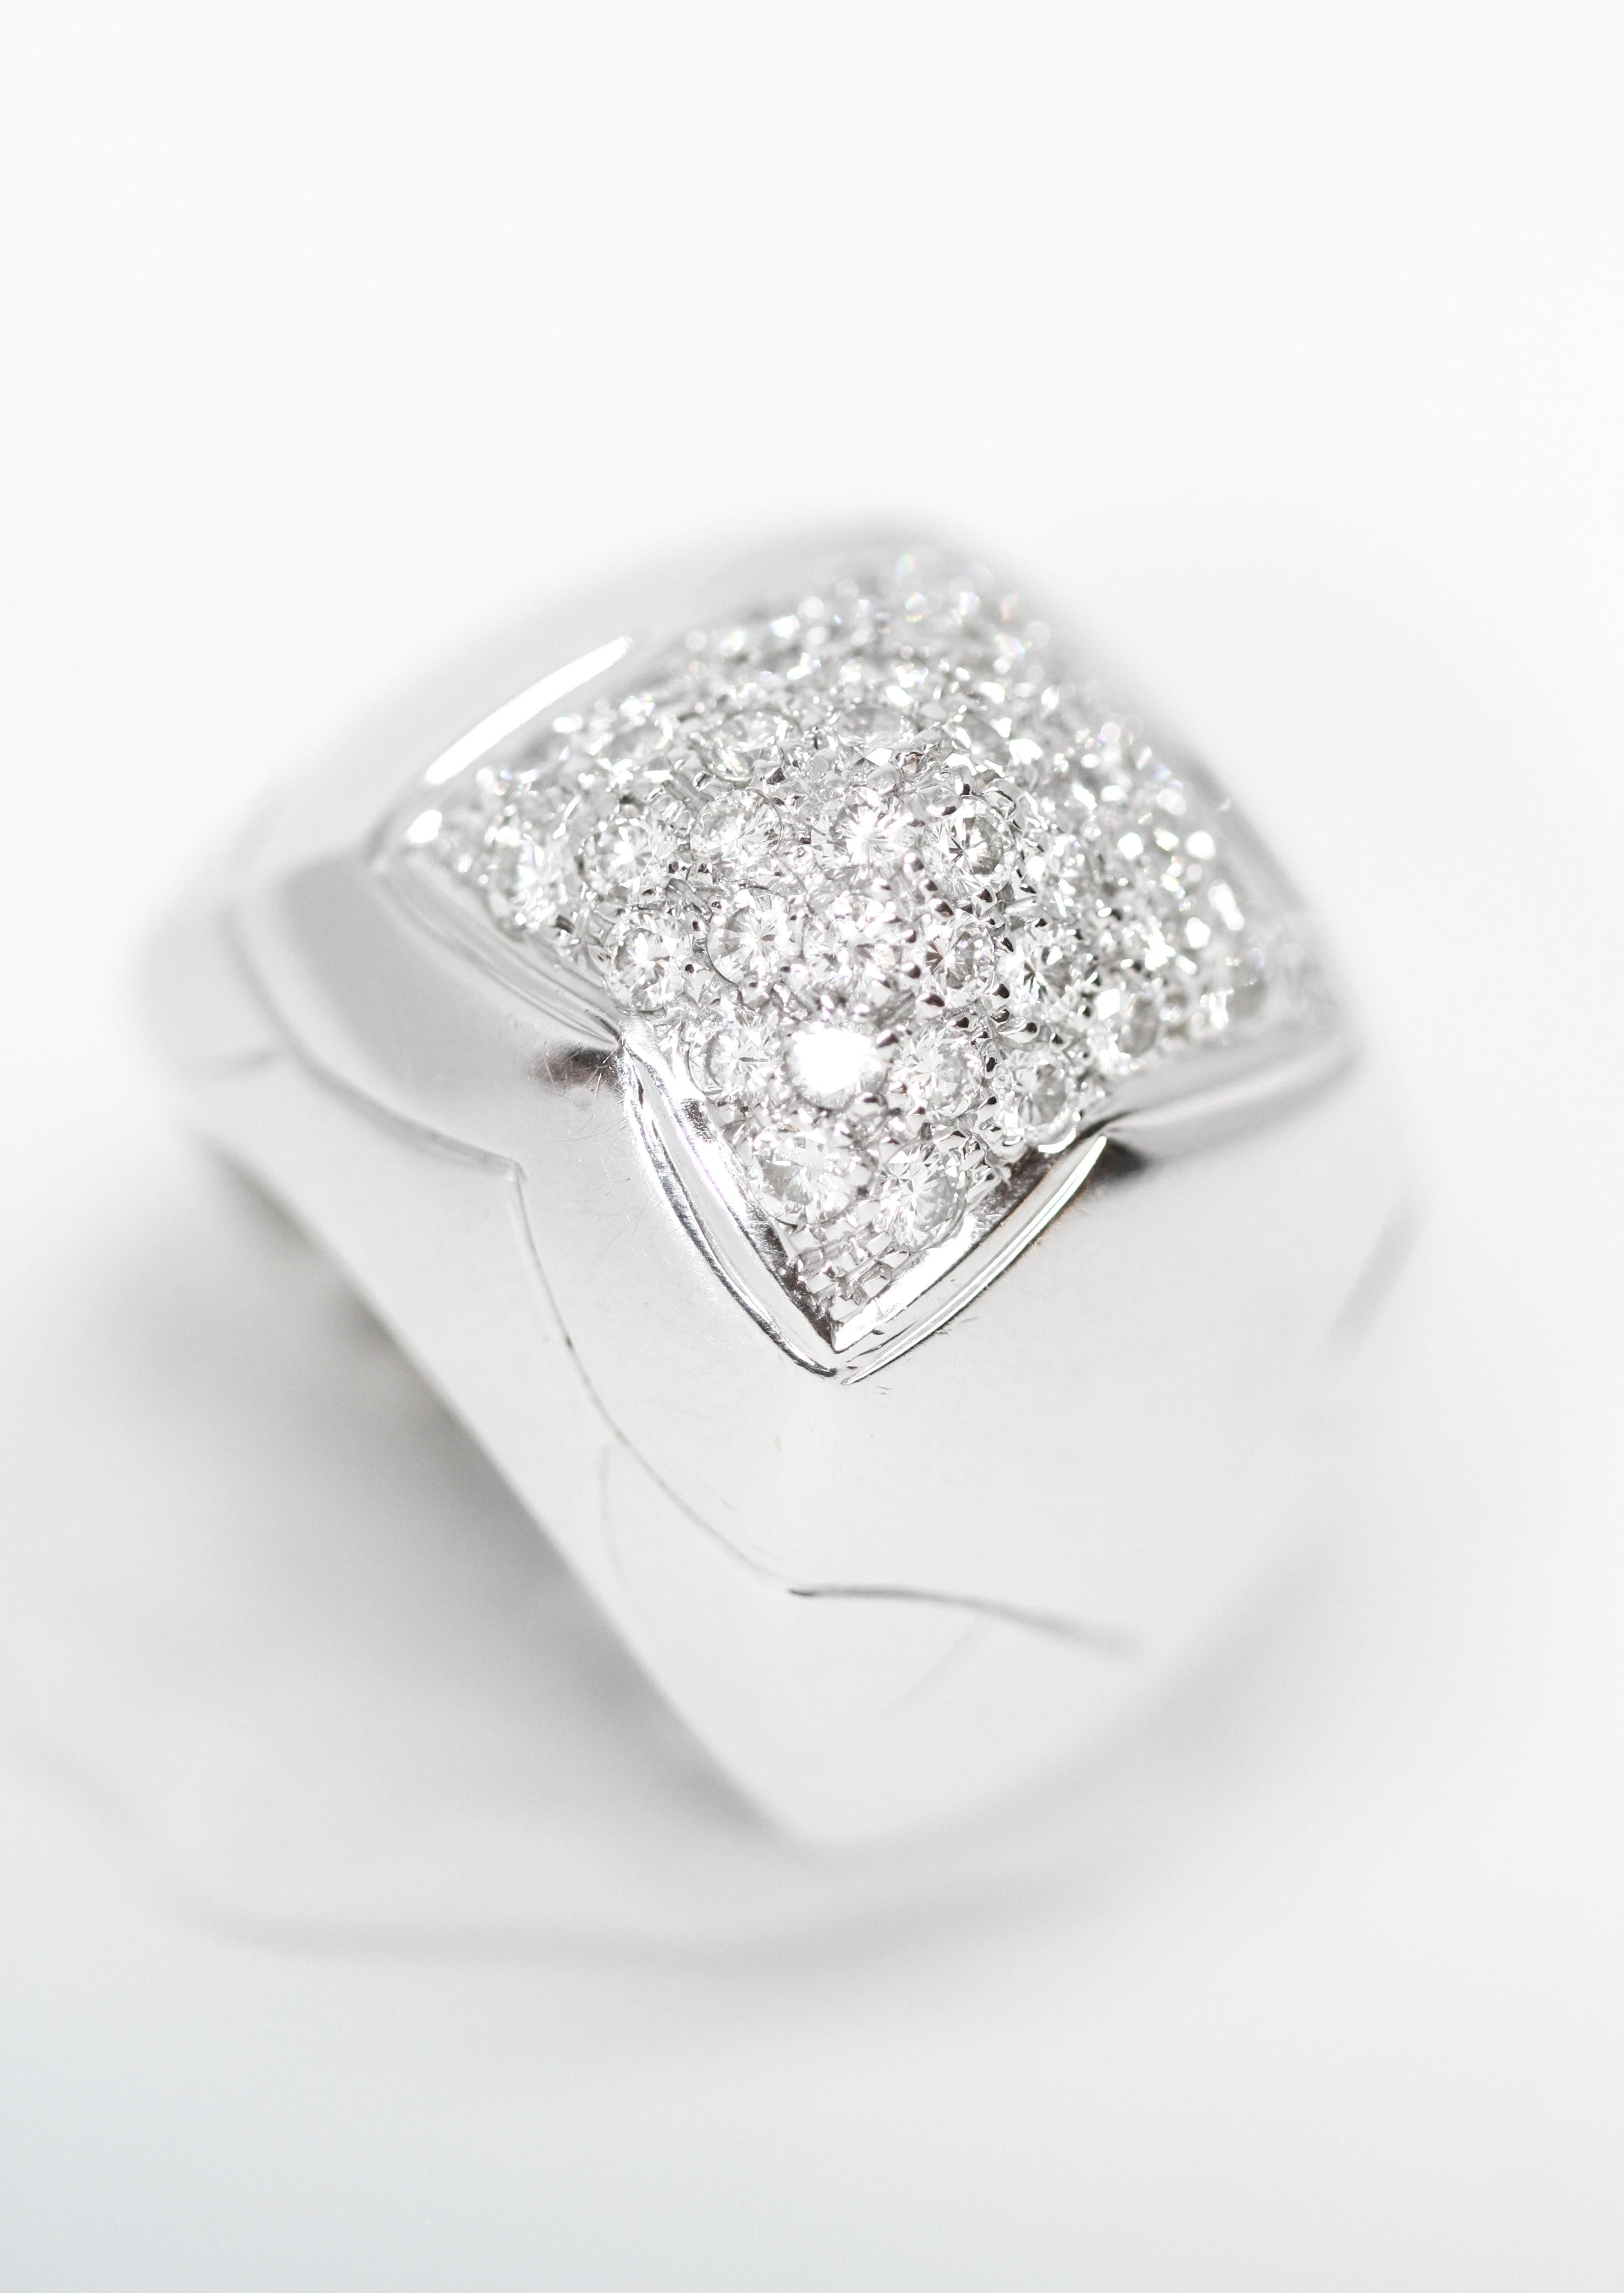 An elegant Bulgari Pyramid ring pavé set in the center with round brilliant cut diamonds weighing approximately 1.04 cts.

Collection: Pyramide
Material: 18k White gold and diamonds
Size: 53 approx. 6.5
Measurements: height: 28mm -